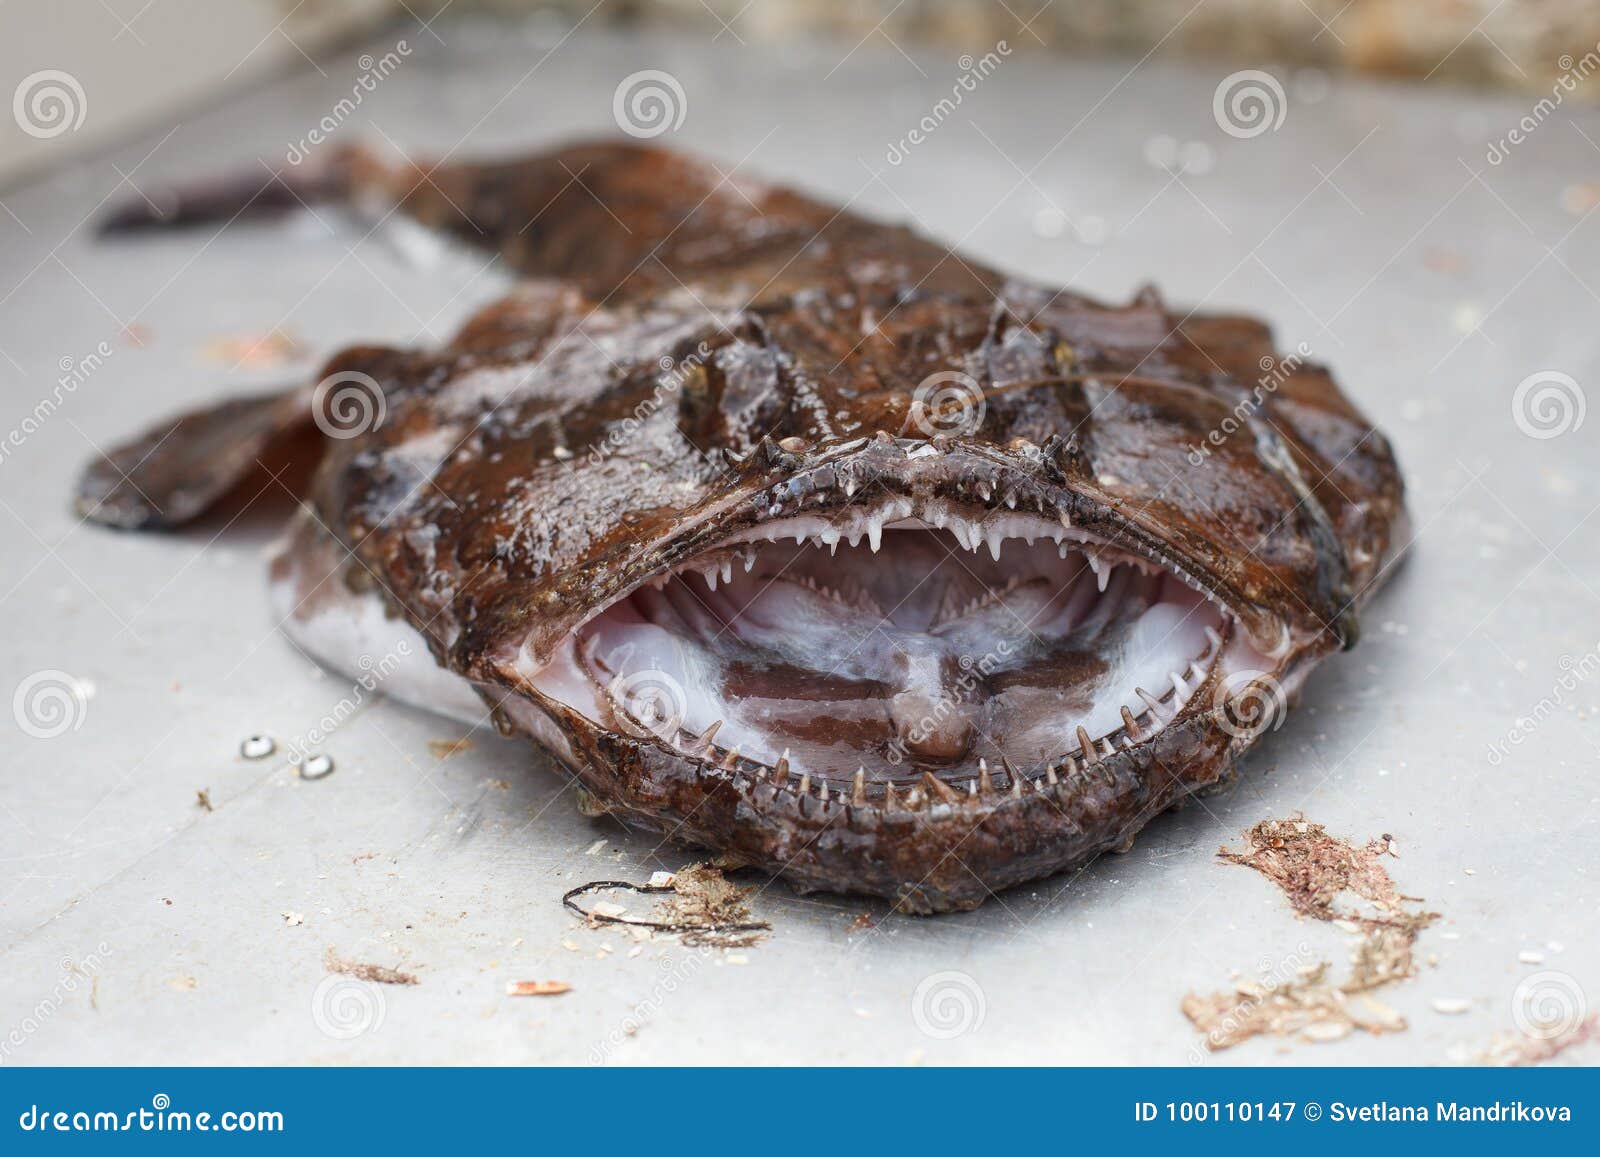 Raw angler fish stock image. Image of lophius, catch - 100110147